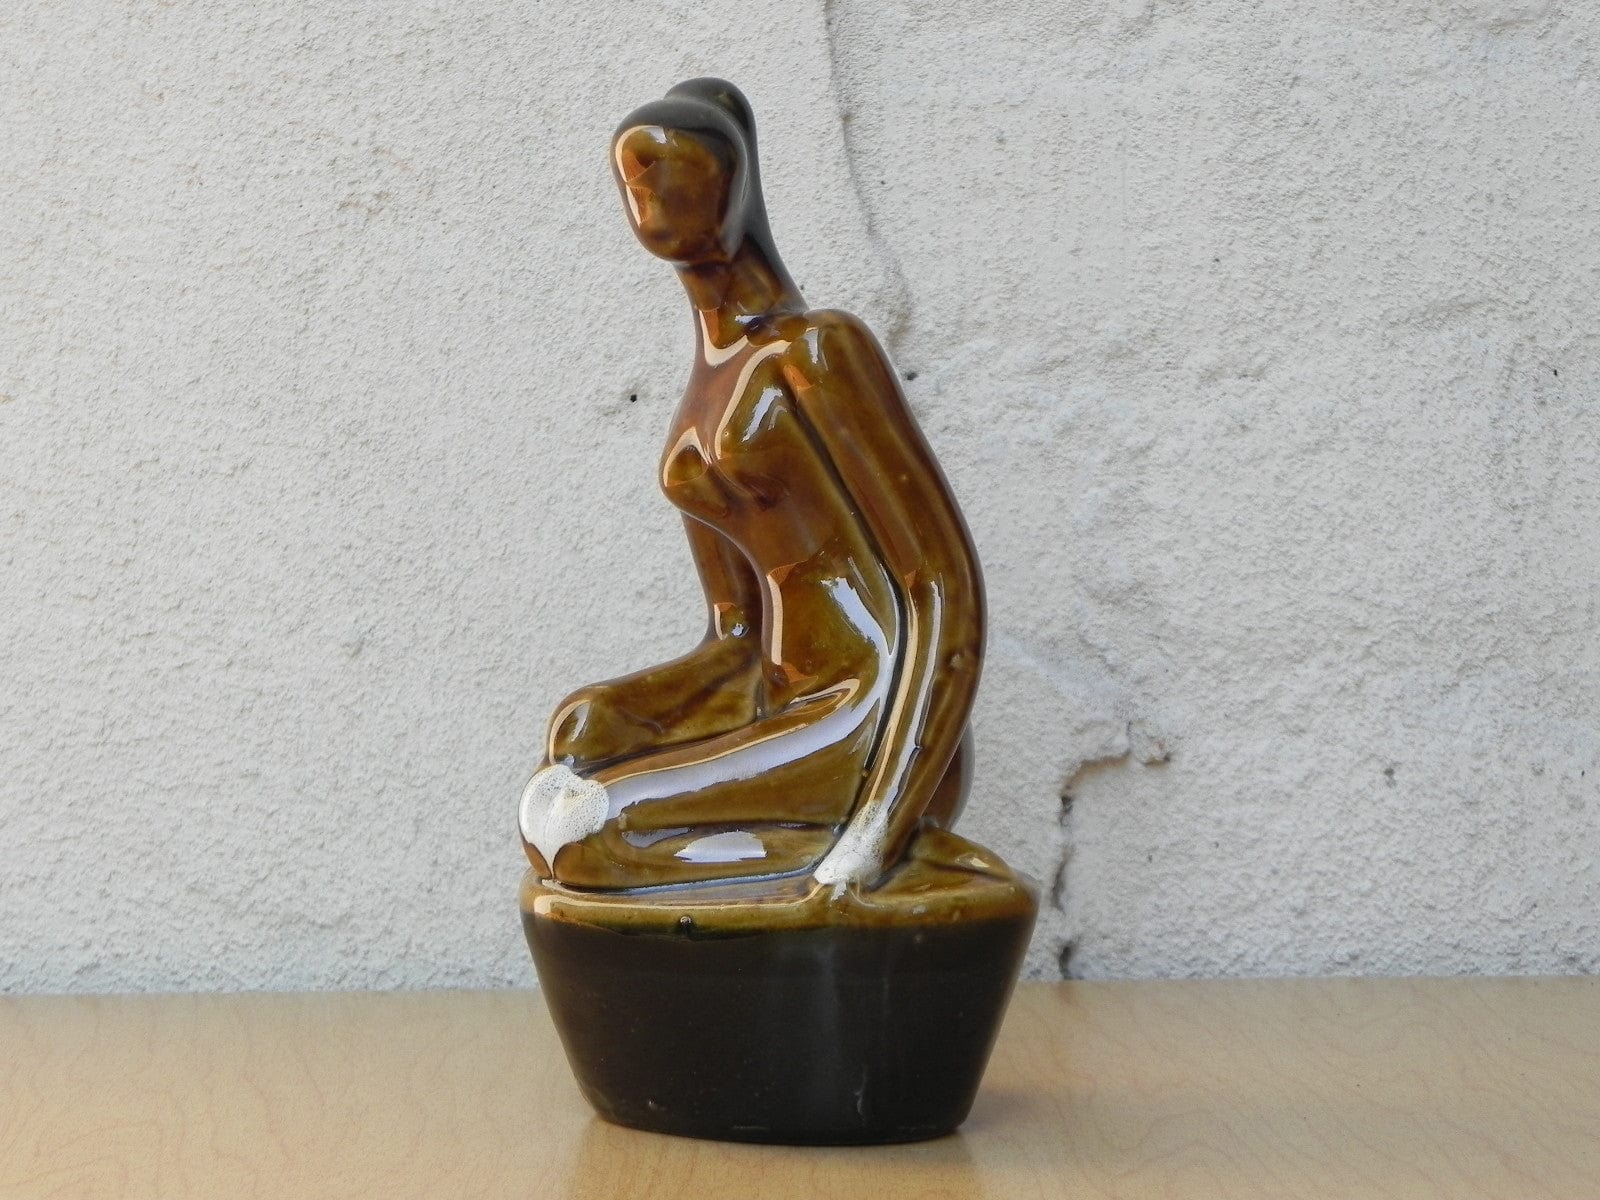 I Like Mike's Mid Century Modern Sculptures & Statues Small Ceramic Glazed Brown Stoneware Female Nude